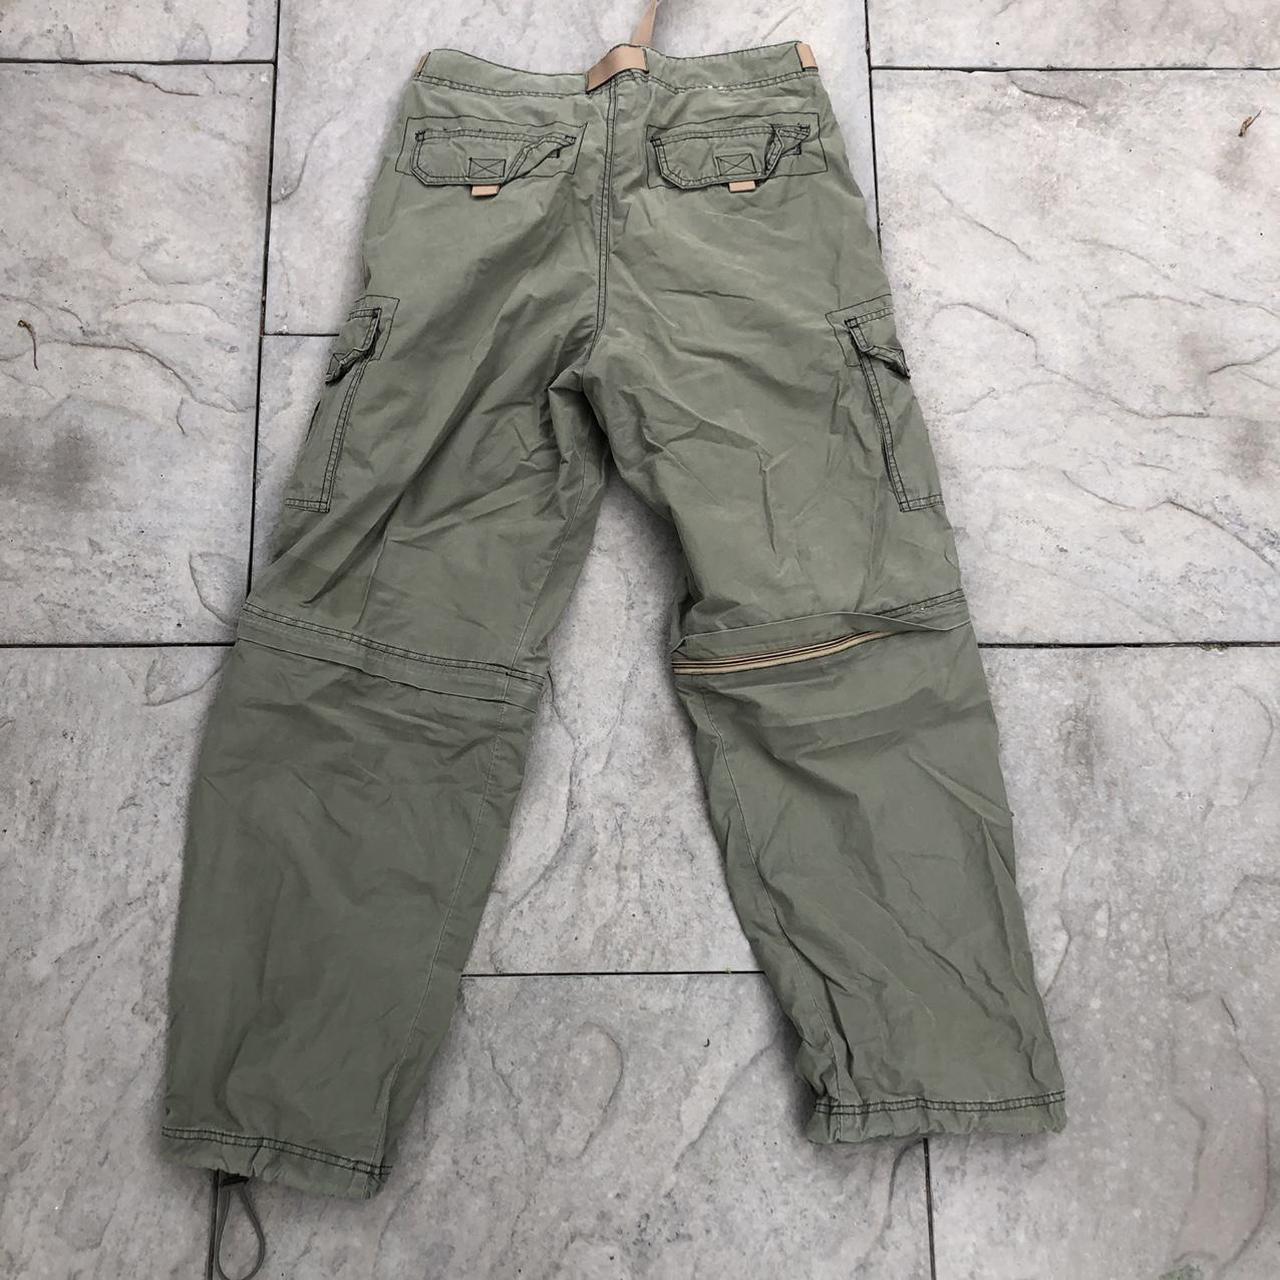 Canyon River Blues Men's Green and Brown Trousers | Depop